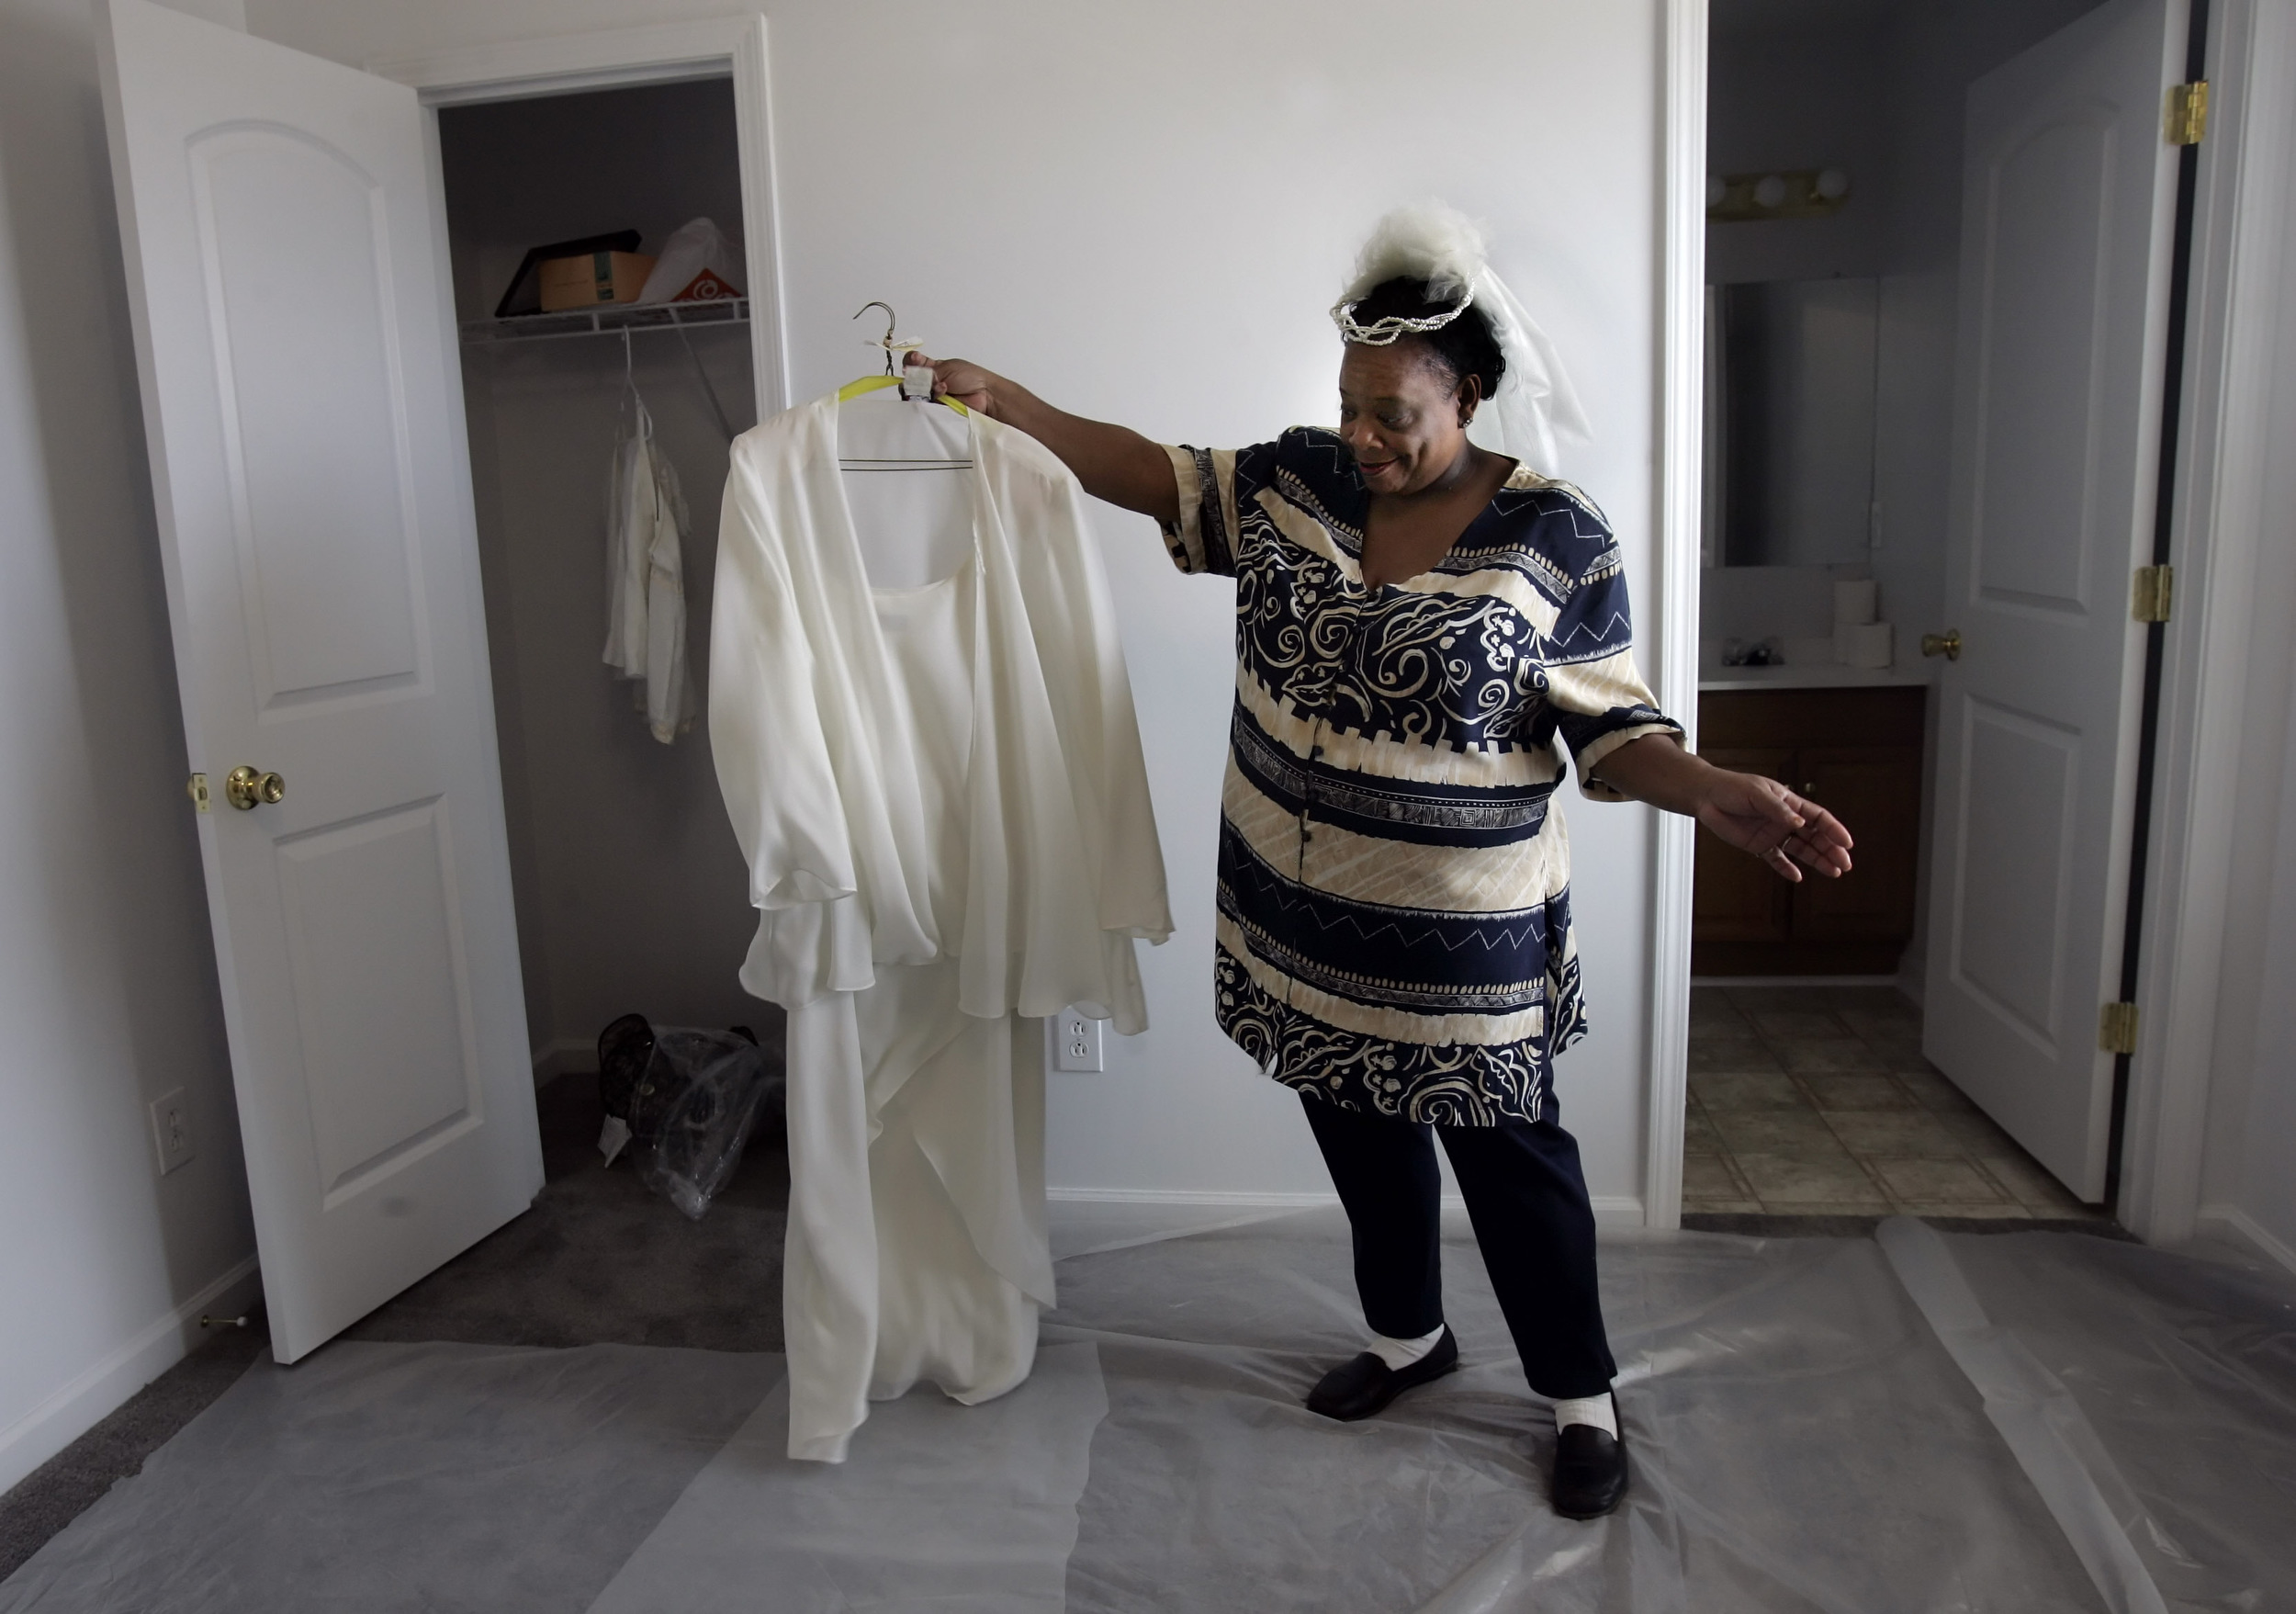  Phyllis Palmer shows off her wedding dress in her new habitat house  in Nashville, Tenn. Palmer and George Shaw, who was displaced by Katrina, will be married Sunday afternoon at the Habitat for Humanity's Timberwood subdivision site. 